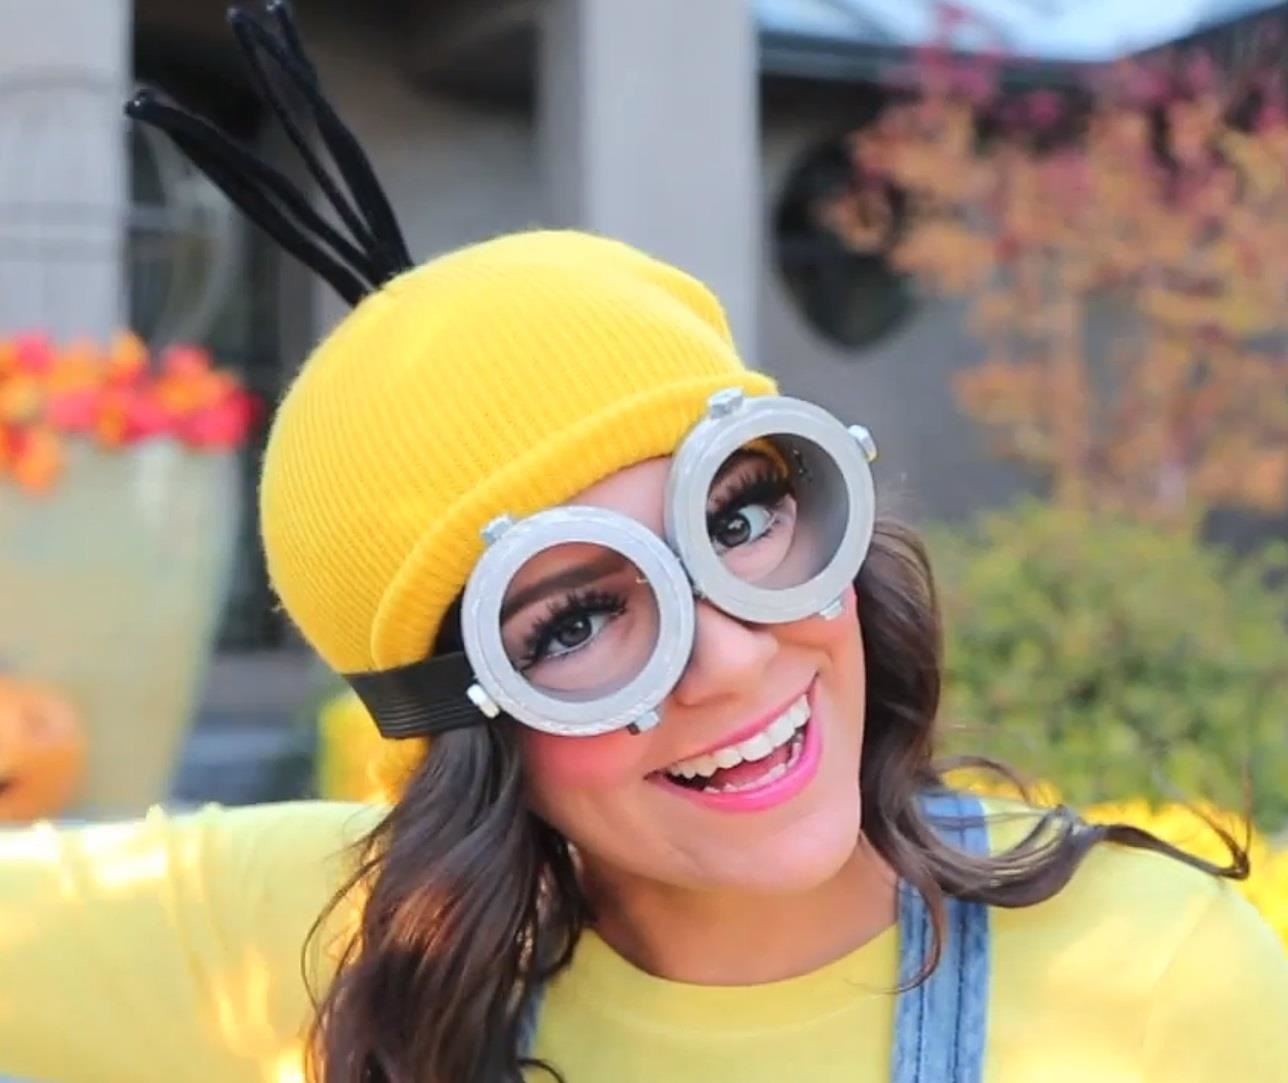 Bee-Do, Bee-Do! 5 Awesome DIY Minion Halloween Costumes from